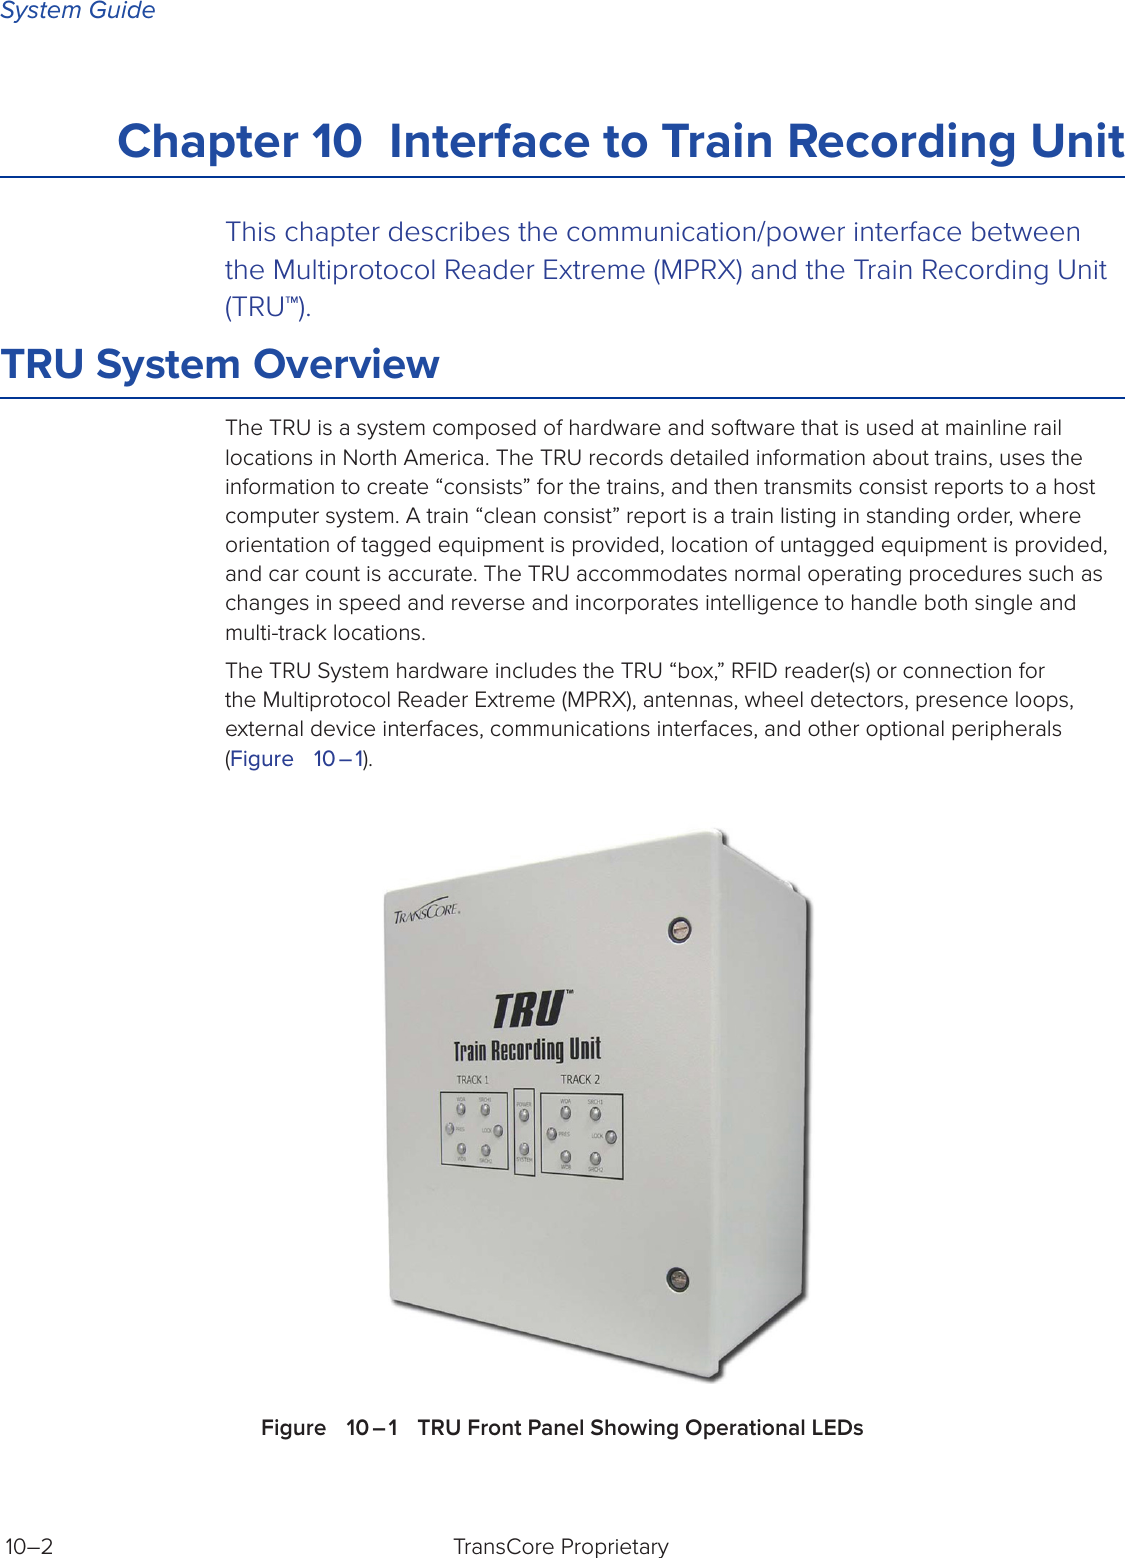 System GuideTransCore Proprietary 10–2Chapter 10  Interface to Train Recording Unit This chapter describes the communication/power interface between the Multiprotocol Reader Extreme (MPRX) and the Train Recording Unit (TRU™).TRU System OverviewThe TRU is a system composed of hardware and software that is used at mainline rail locations in North America. The TRU records detailed information about trains, uses the information to create “consists” for the trains, and then transmits consist reports to a host computer system. A train “clean consist” report is a train listing in standing order, where orientation of tagged equipment is provided, location of untagged equipment is provided, and car count is accurate. The TRU accommodates normal operating procedures such as changes in speed and reverse and incorporates intelligence to handle both single and multi-track locations.The TRU System hardware includes the TRU “box,” RFID reader(s) or connection for the Multiprotocol Reader Extreme (MPRX), antennas, wheel detectors, presence loops, external device interfaces, communications interfaces, and other optional peripherals (Figure   10 – 1).Figure   10 – 1   TRU Front Panel Showing Operational LEDs